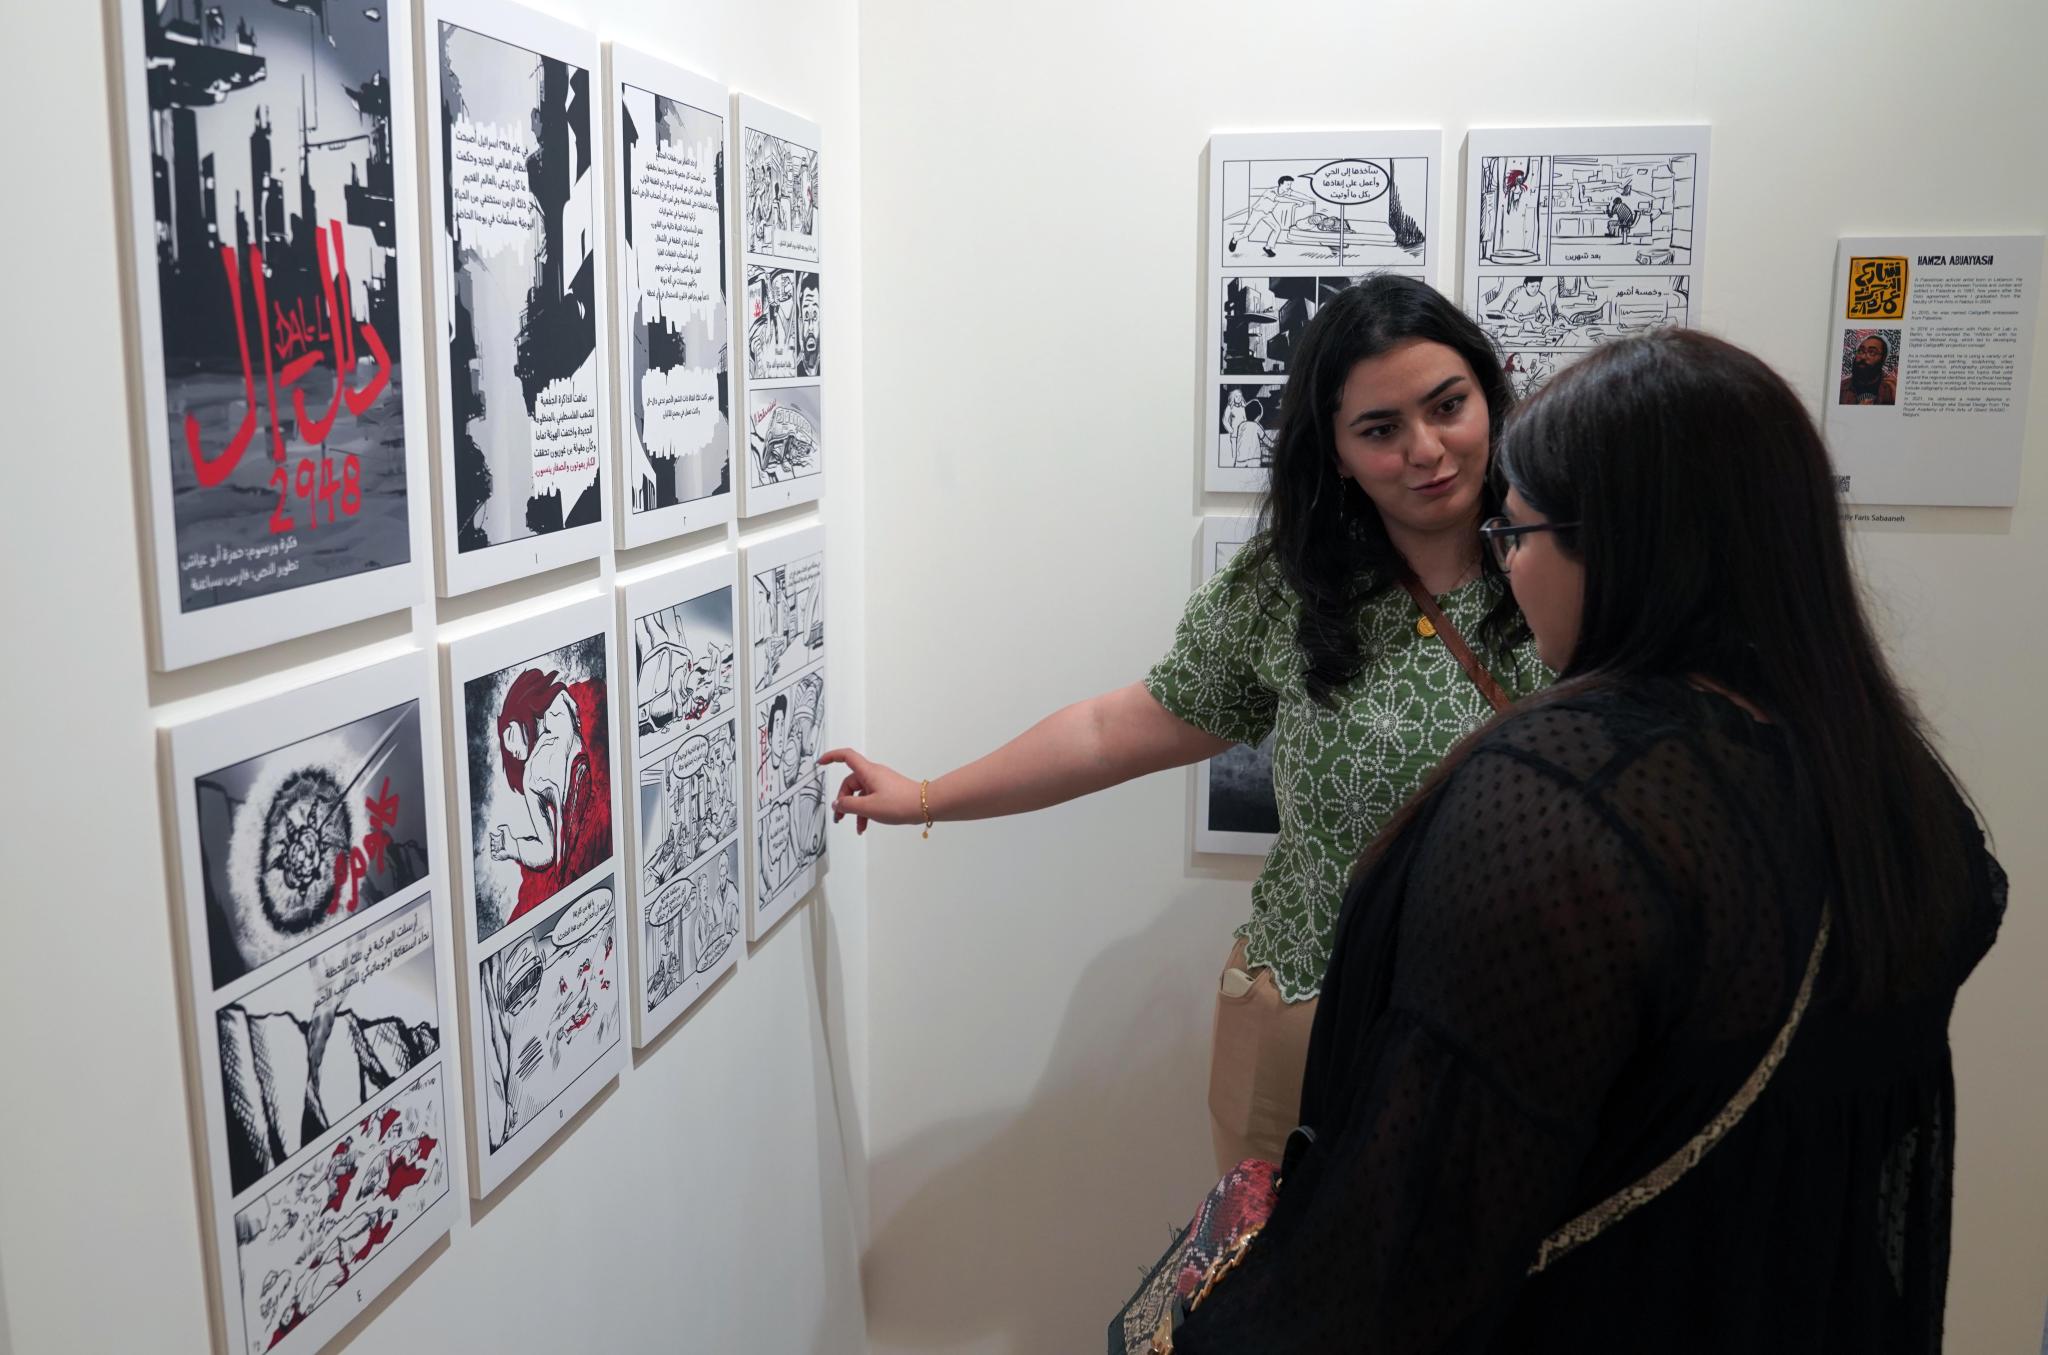 On the Occasion of the 75th Anniversary of the Palestinian Nakba, AAUP Students Participate in the First Palestinian Comics Exhibition Entitled "Amara 48"